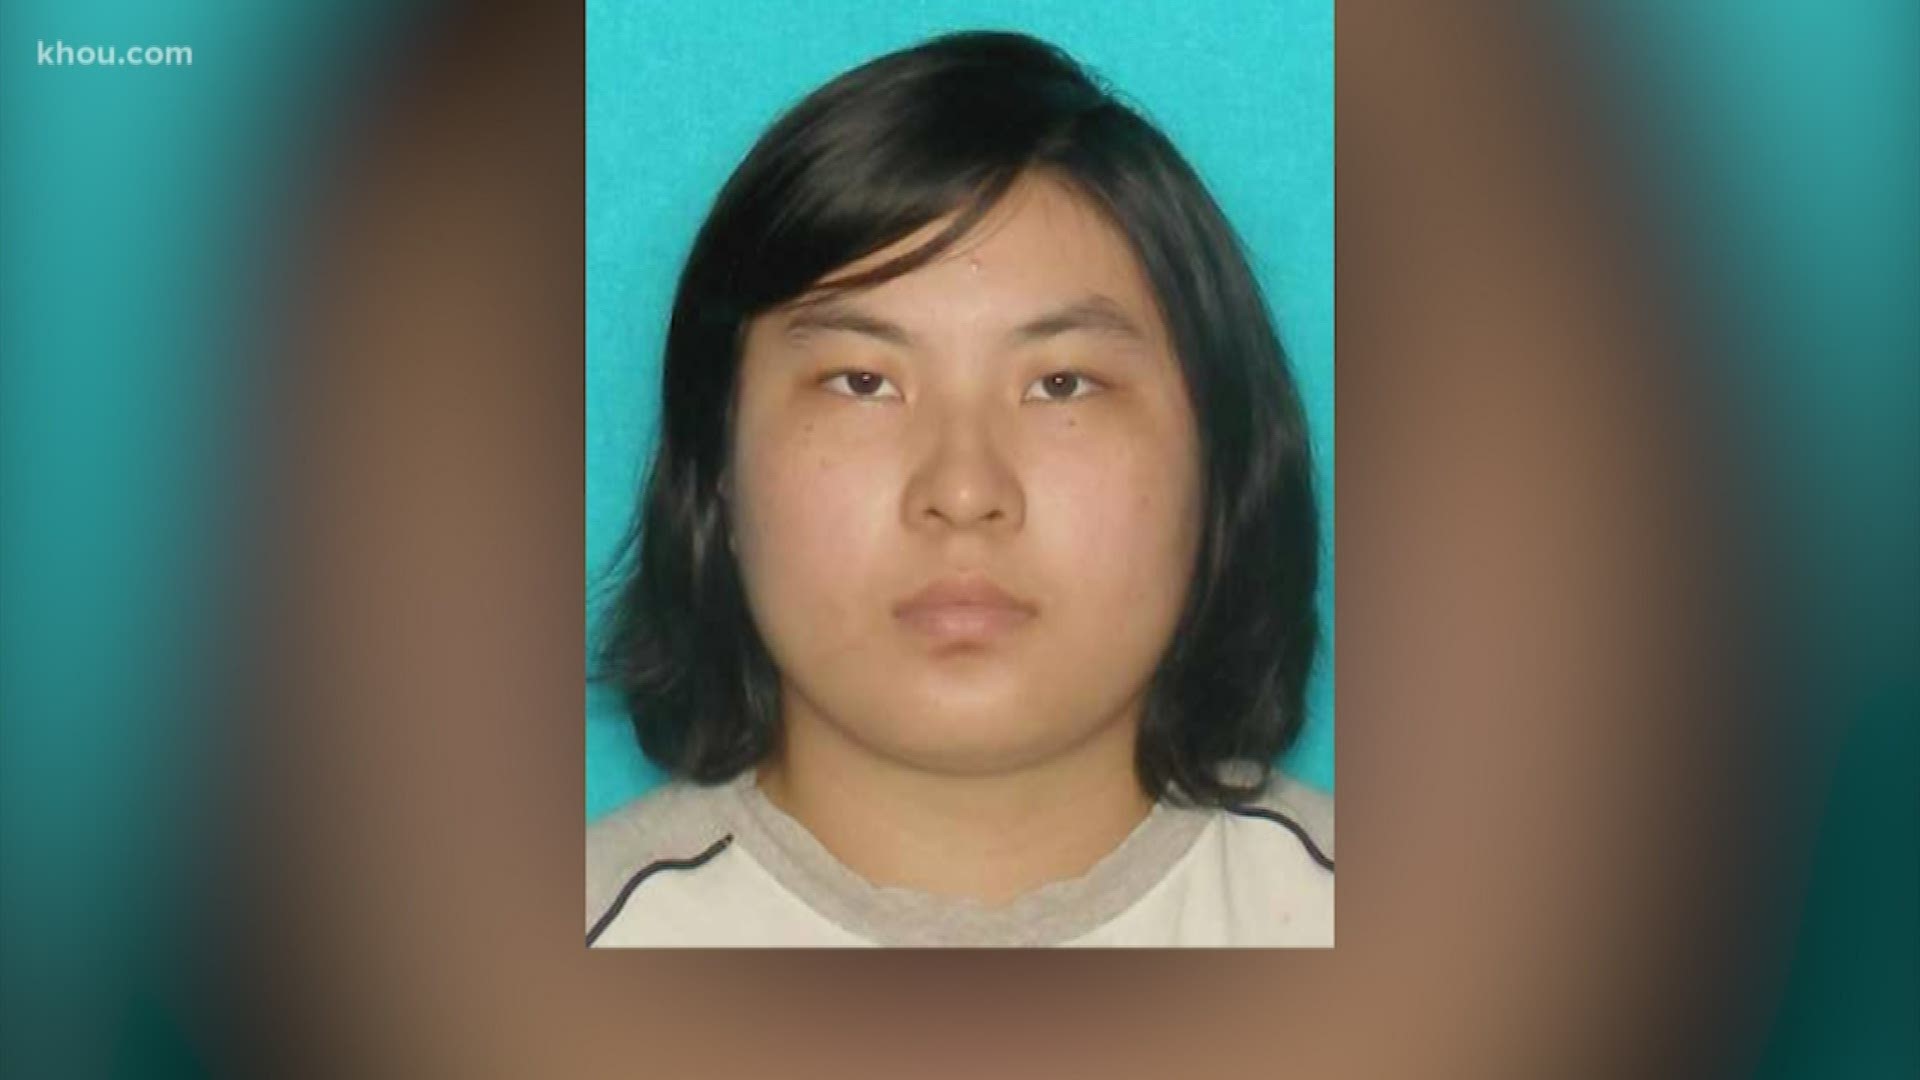 Houston police are searching for a 26-year-old woman who was reported missing and believed to be in danger.